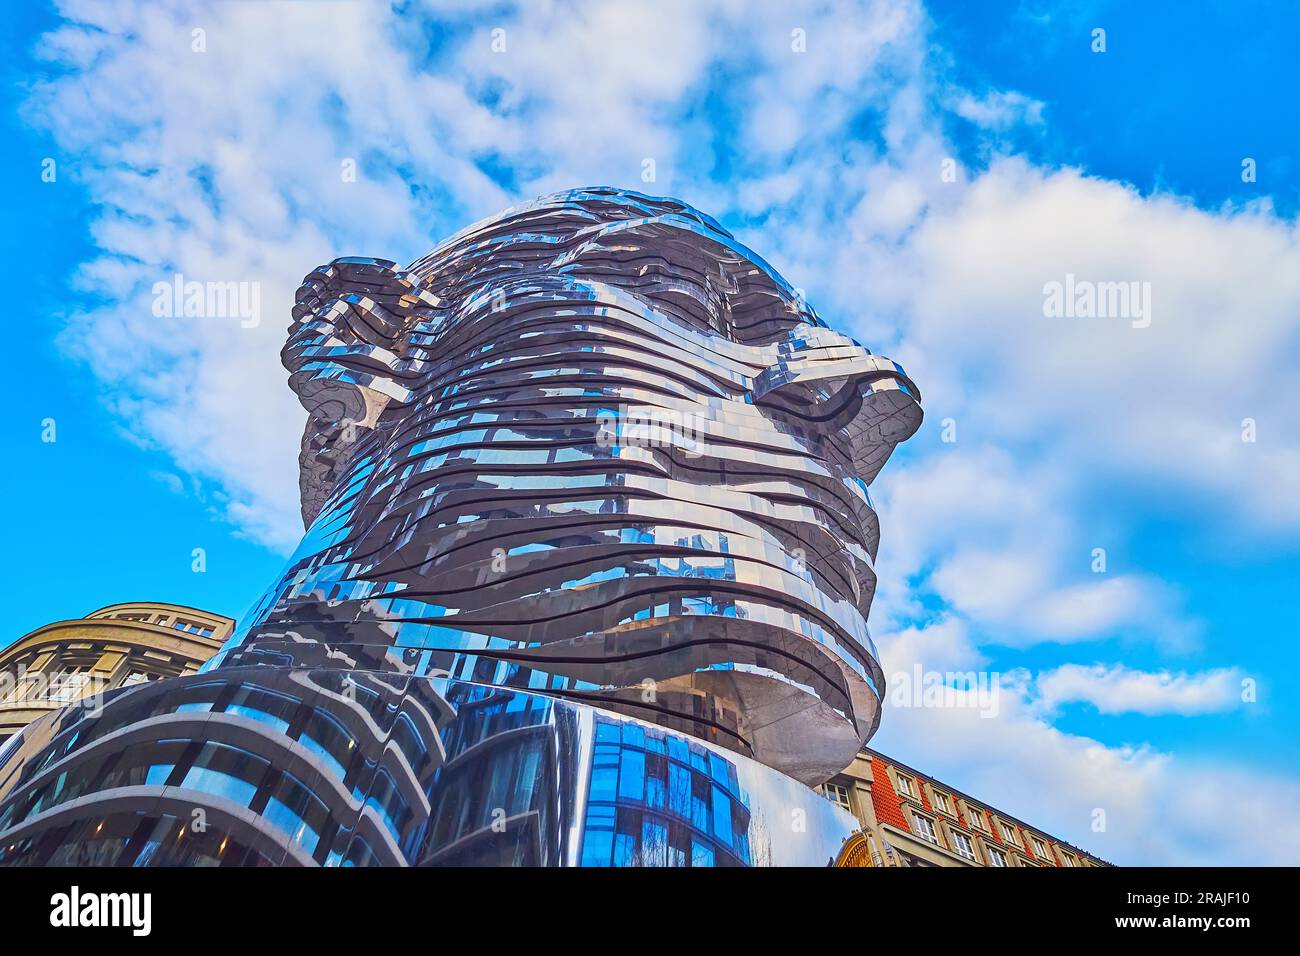 PRAGUE, CZECHIA - MARCH 7, 2022: The worms eye view of the moving statue of Franz Kafka's head by David Cerny, on March 7 in Prague Stock Photo